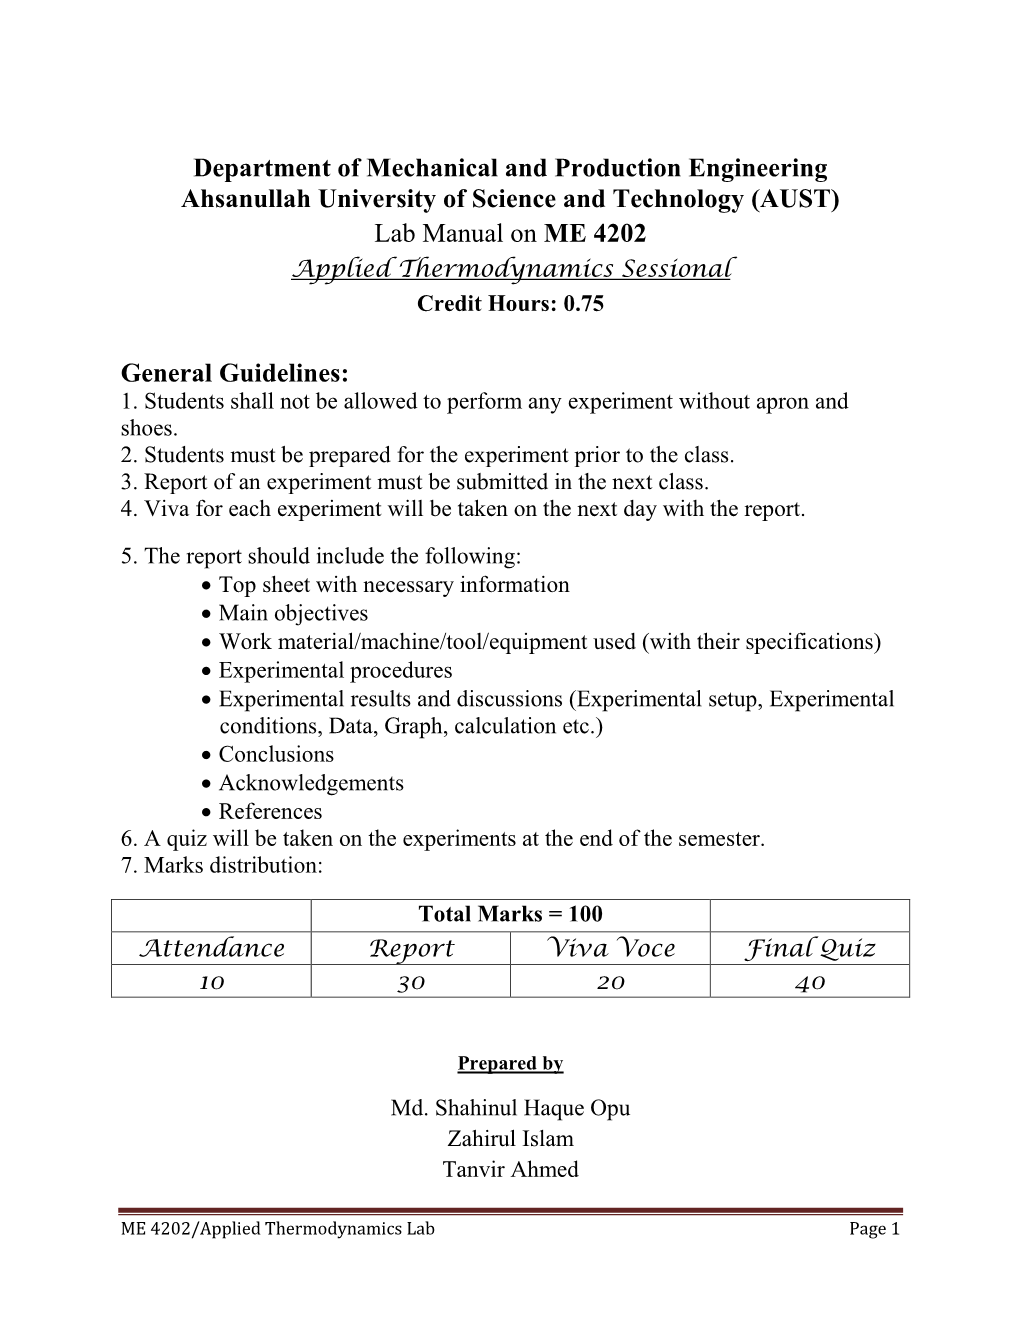 (AUST) Lab Manual on ME 4202 Applied Thermodynamics Sessional Credit Hours: 0.75